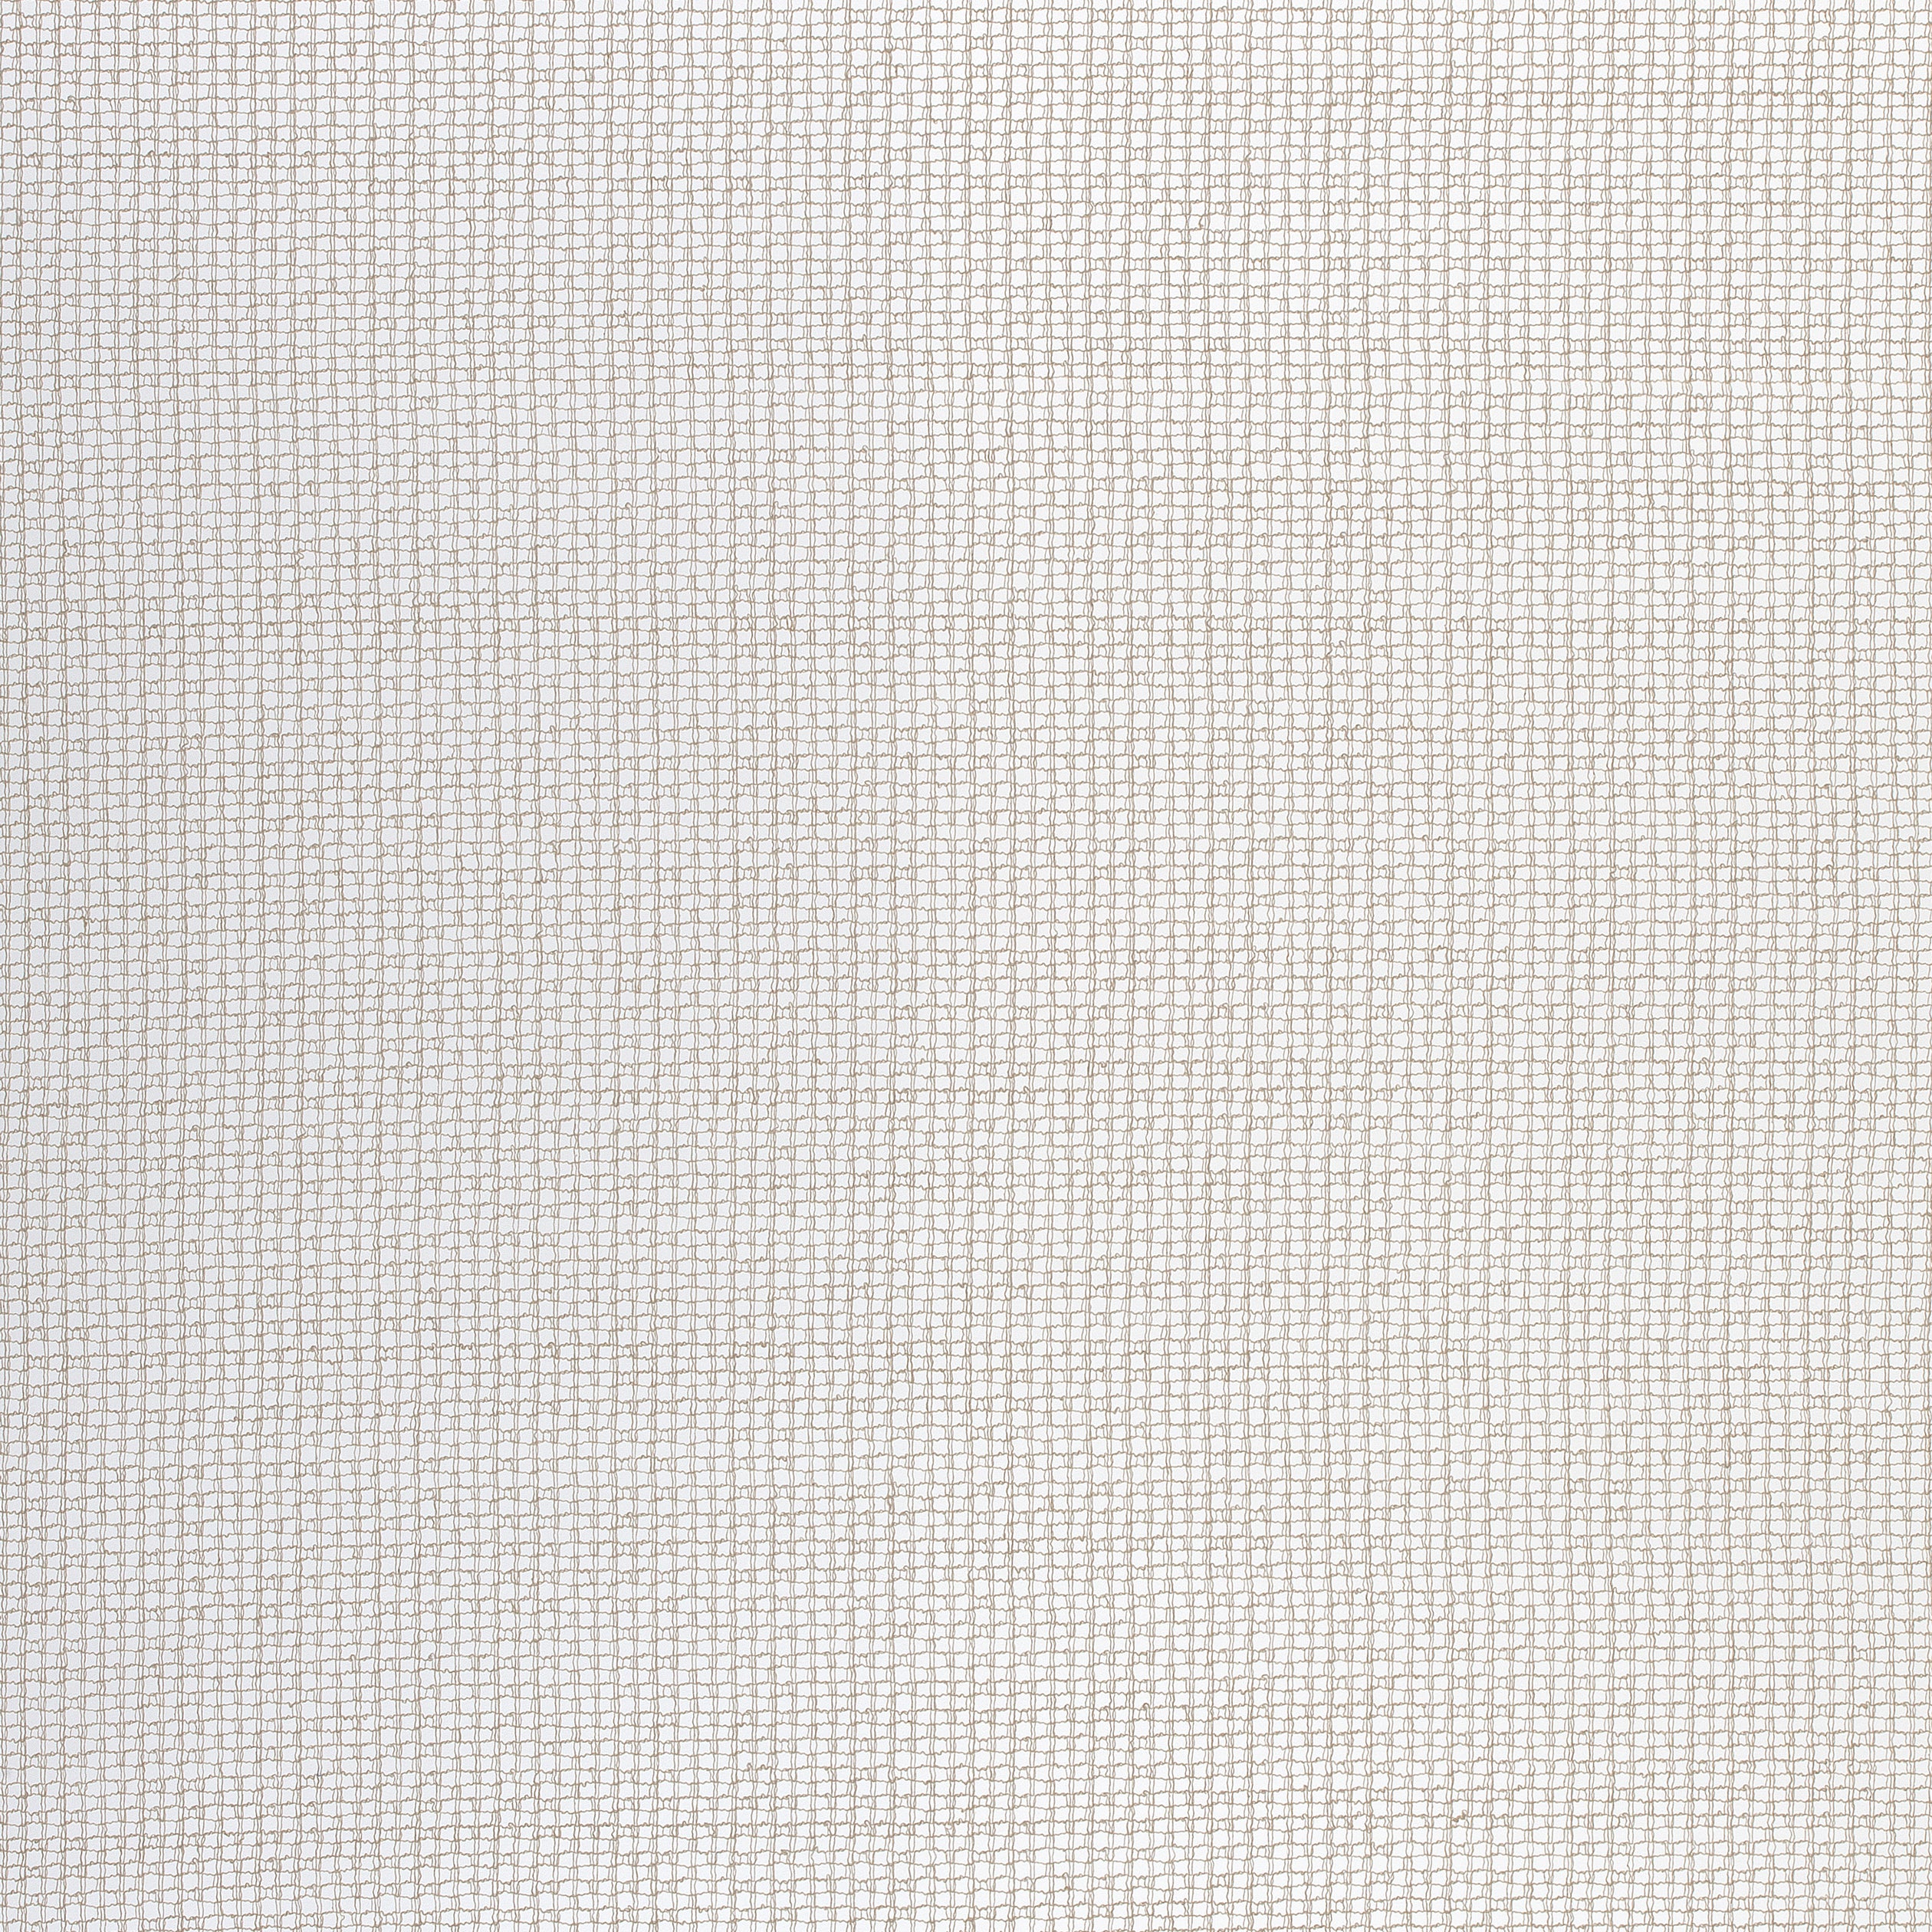 Carballo fabric in ivory color - pattern number FWW7105 - by Thibaut in the Atmosphere collection